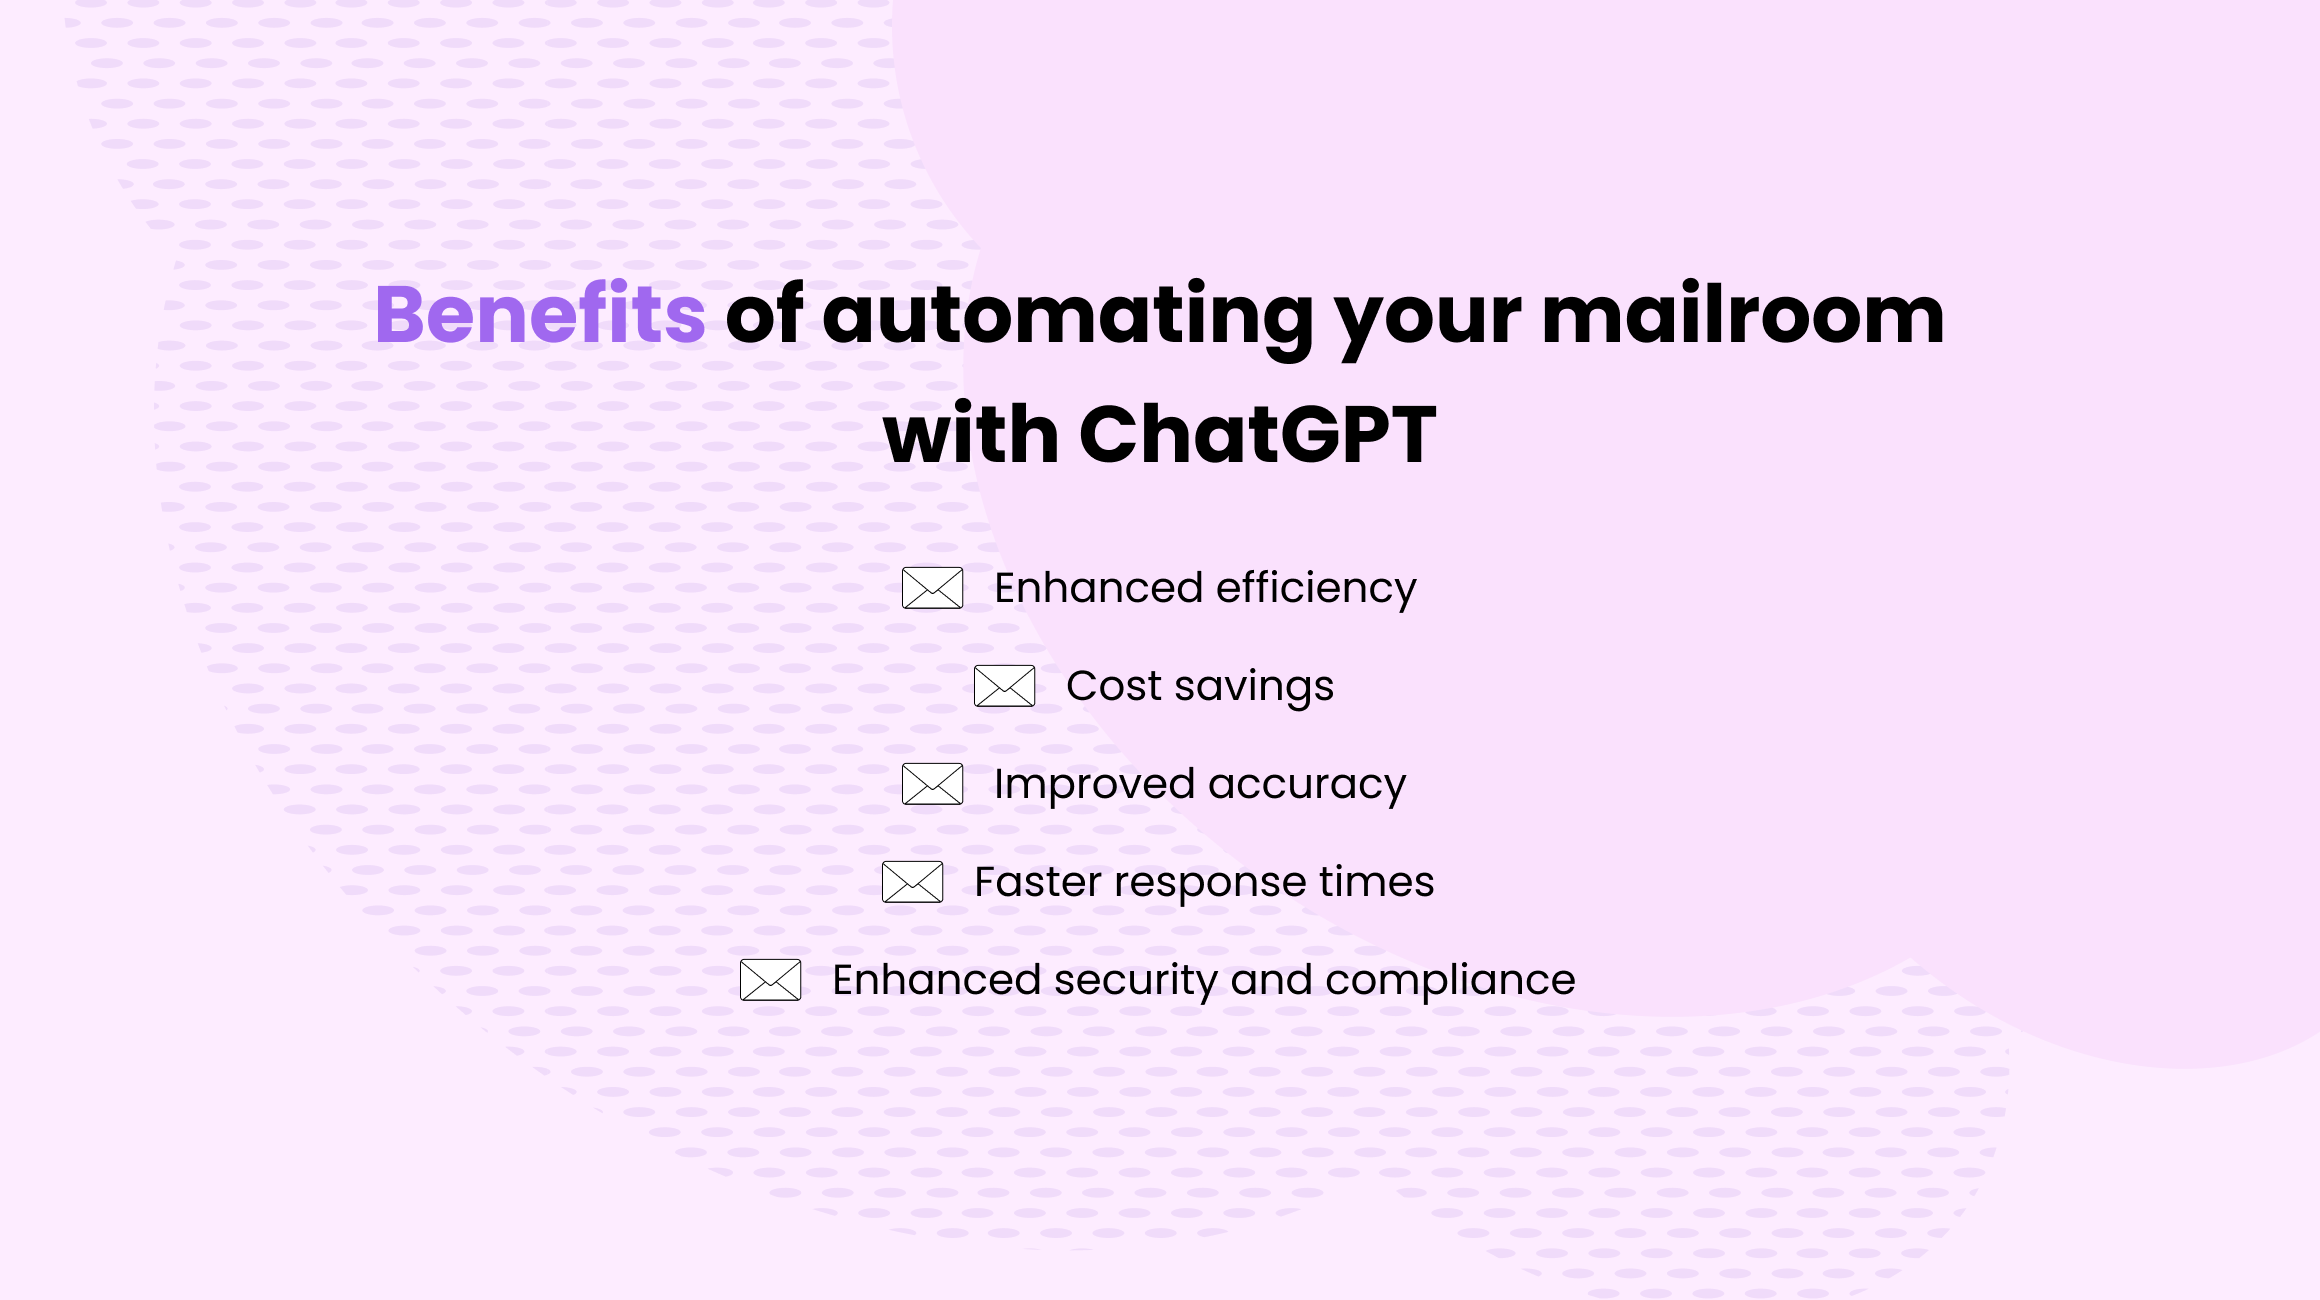 Benefits of Automating Your Mailroom with ChatGPT